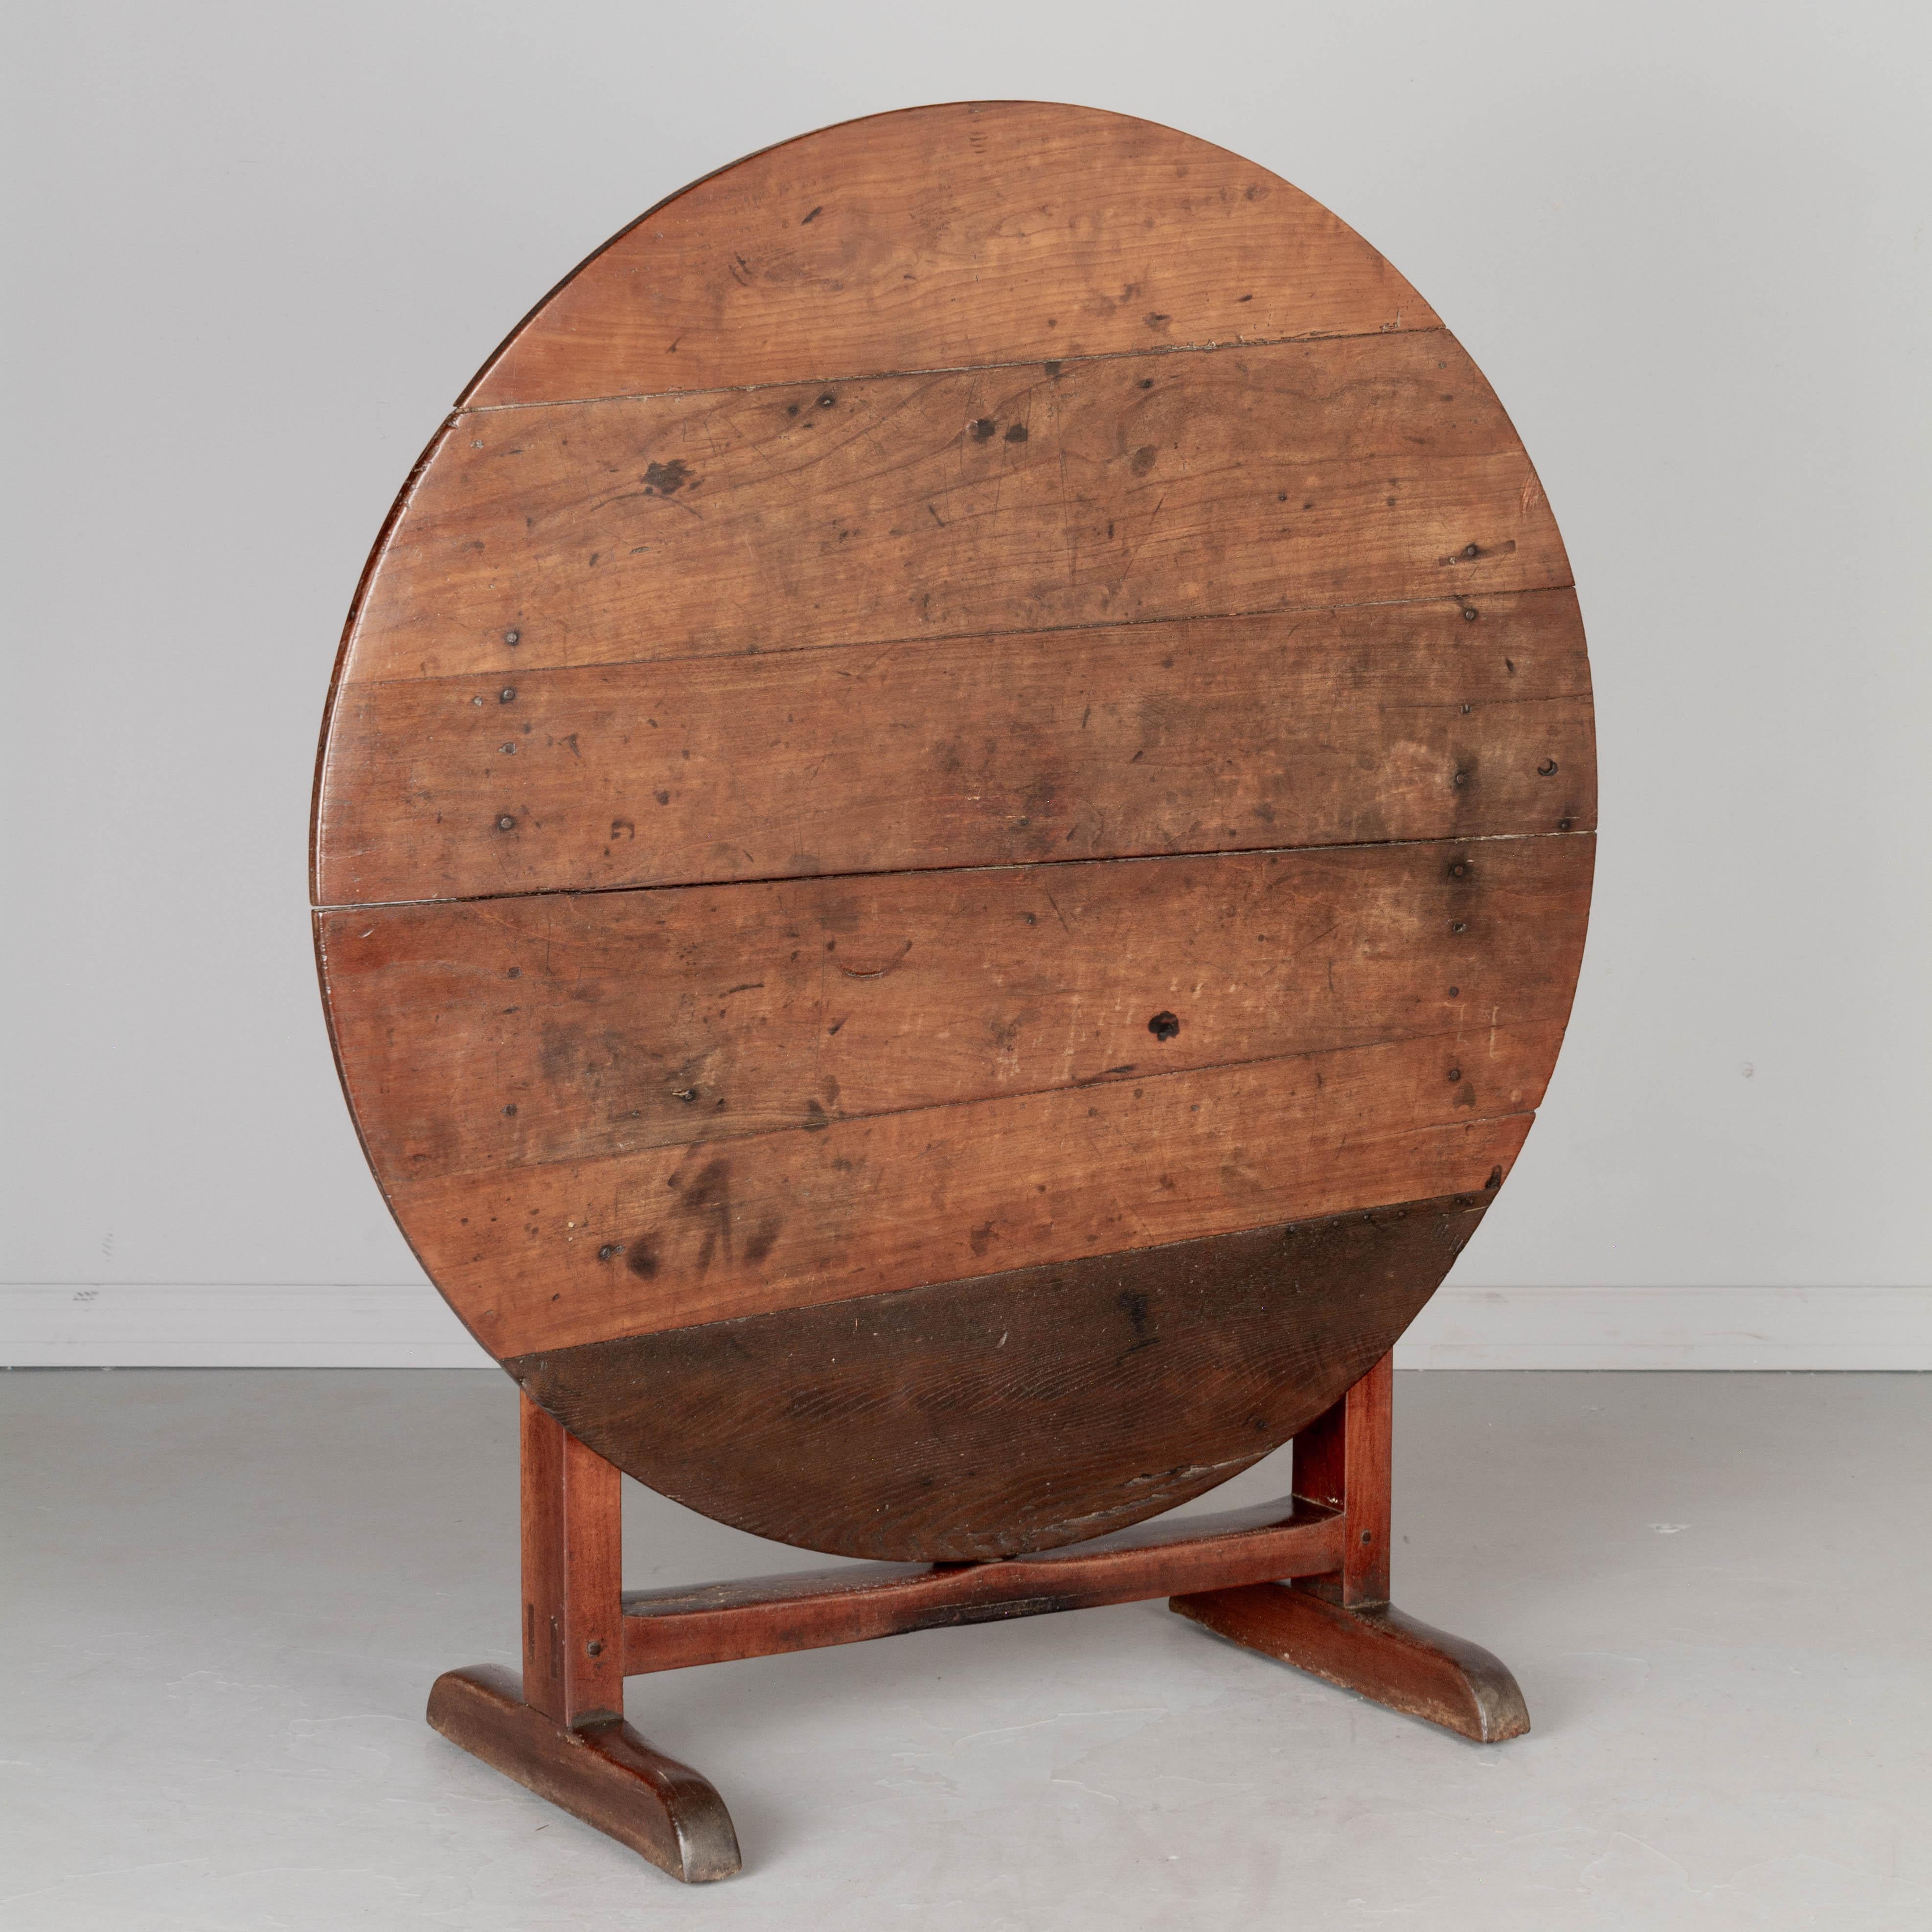 A 19th century French wine tasting, or tilt-top table, made of solid cherry wood. The top has an old restoration with a replaced darker plank of oak. Sturdy and well-crafted with mortise and tenon joints and pegged construction. Nice rustic aged